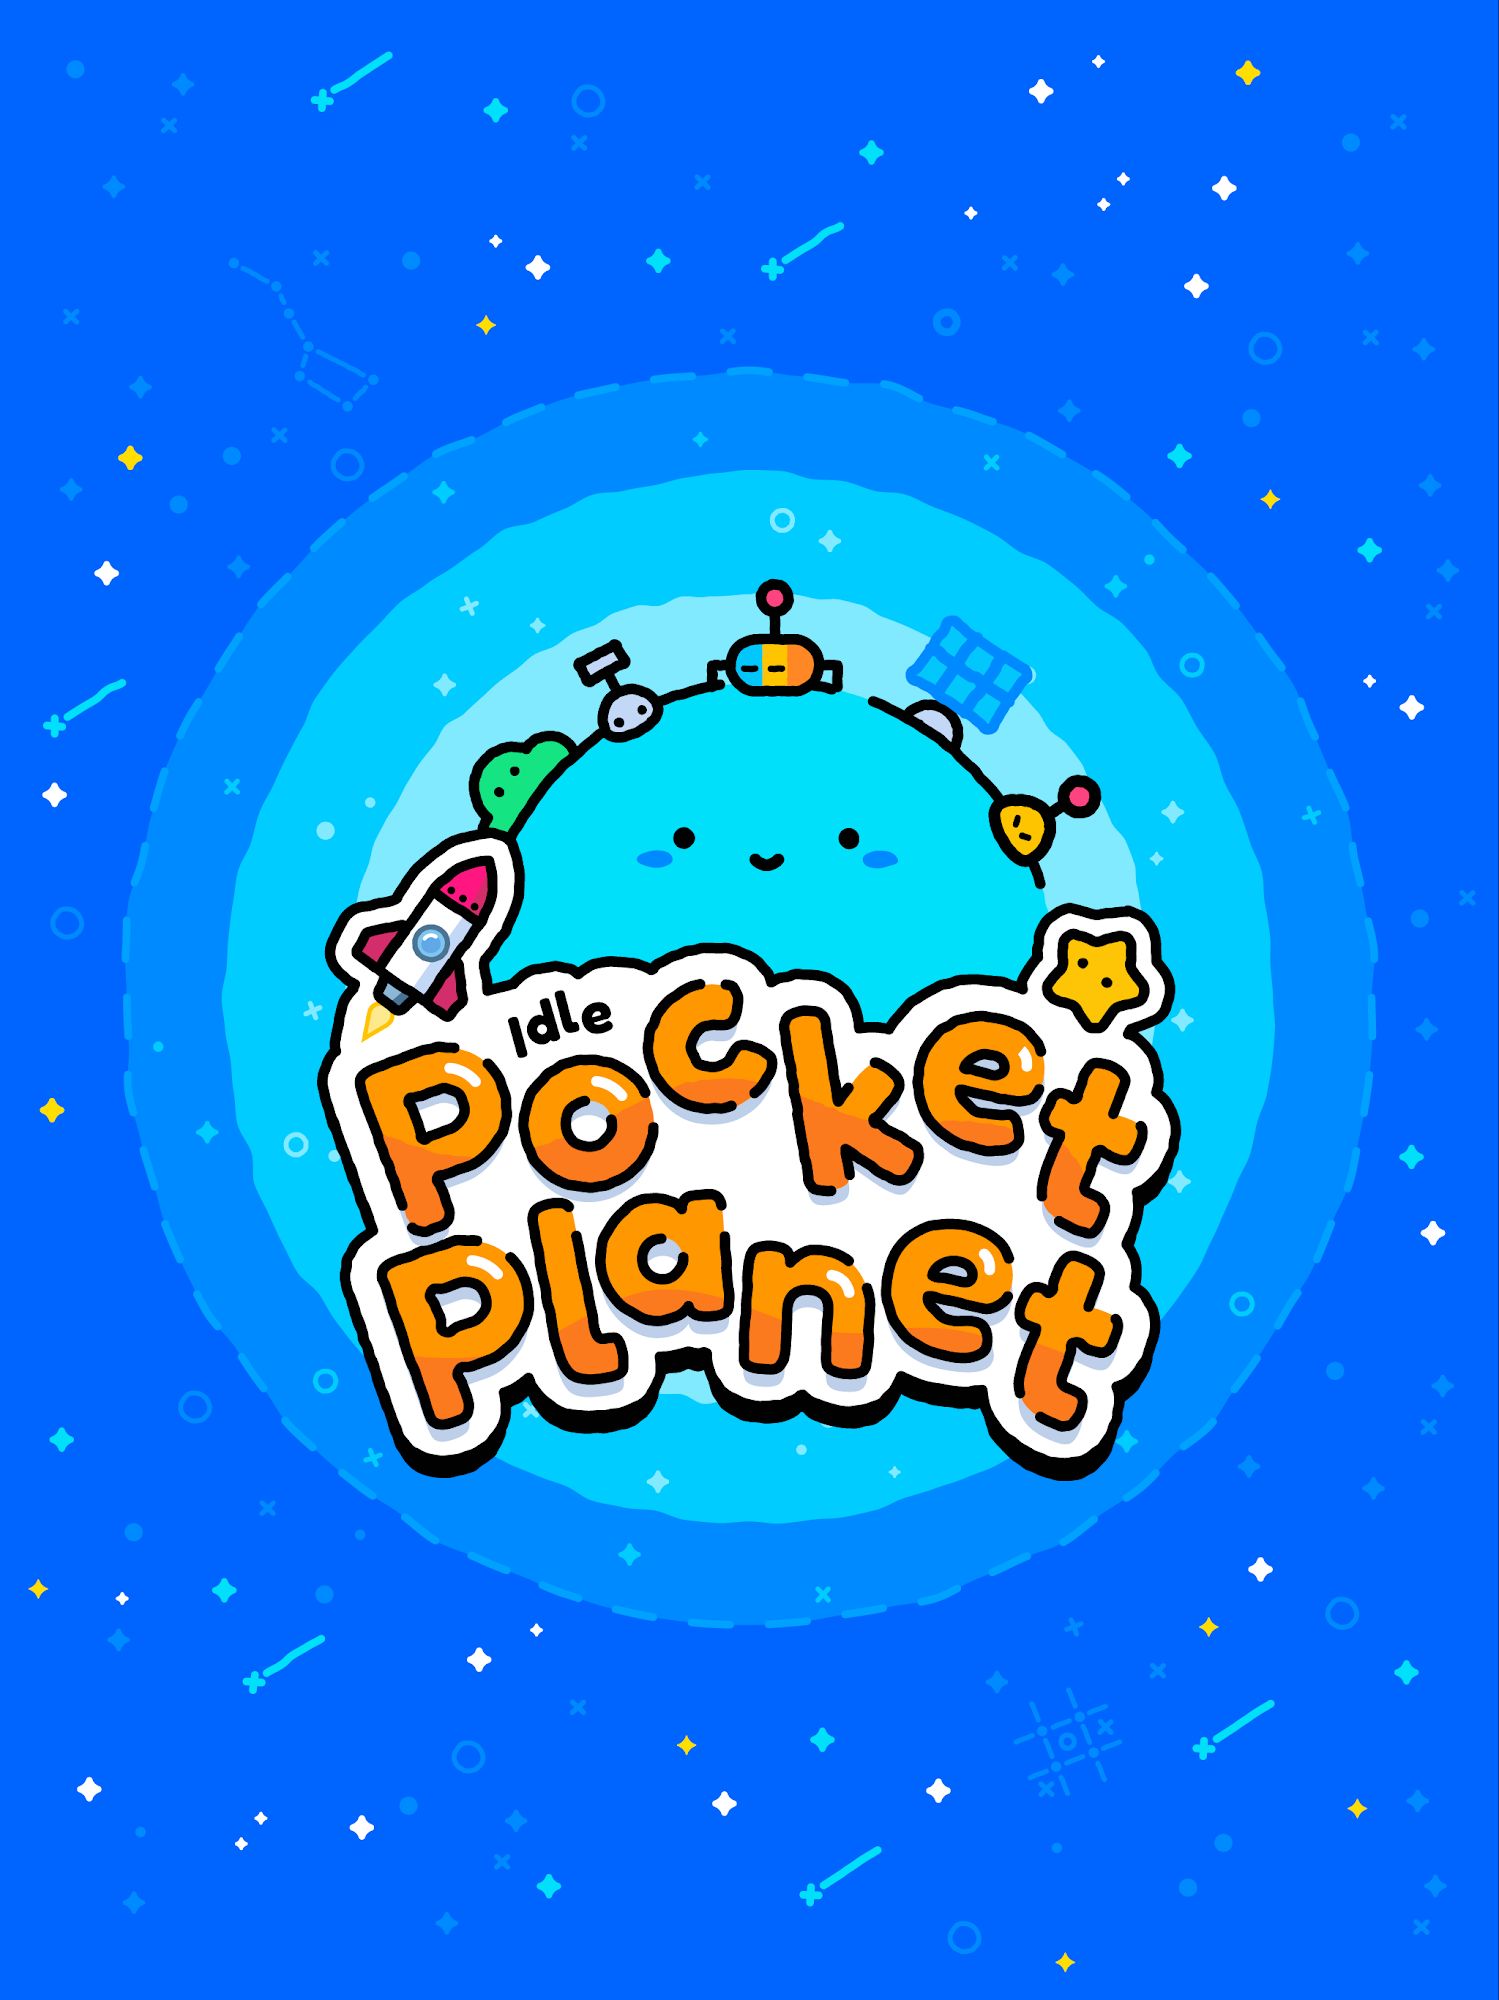 Full version of Android Time killer game apk Idle Pocket Planet for tablet and phone.